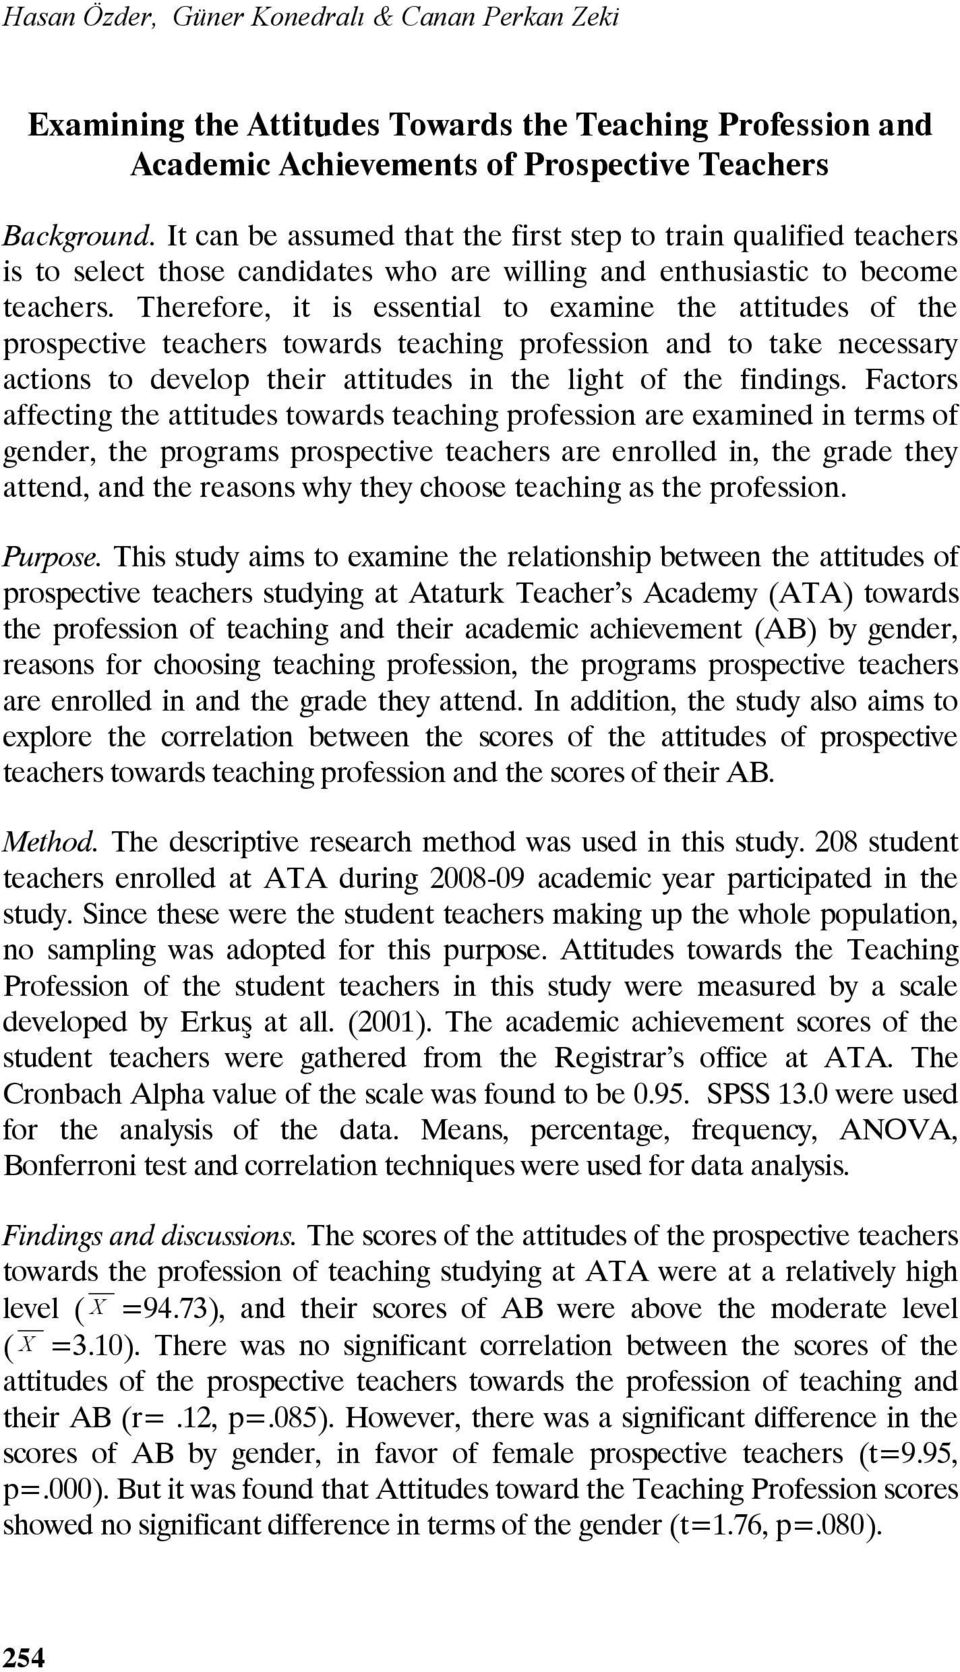 Therefore, it is essential to examine the attitudes of the prospective teachers towards teaching profession and to take necessary actions to develop their attitudes in the light of the findings.